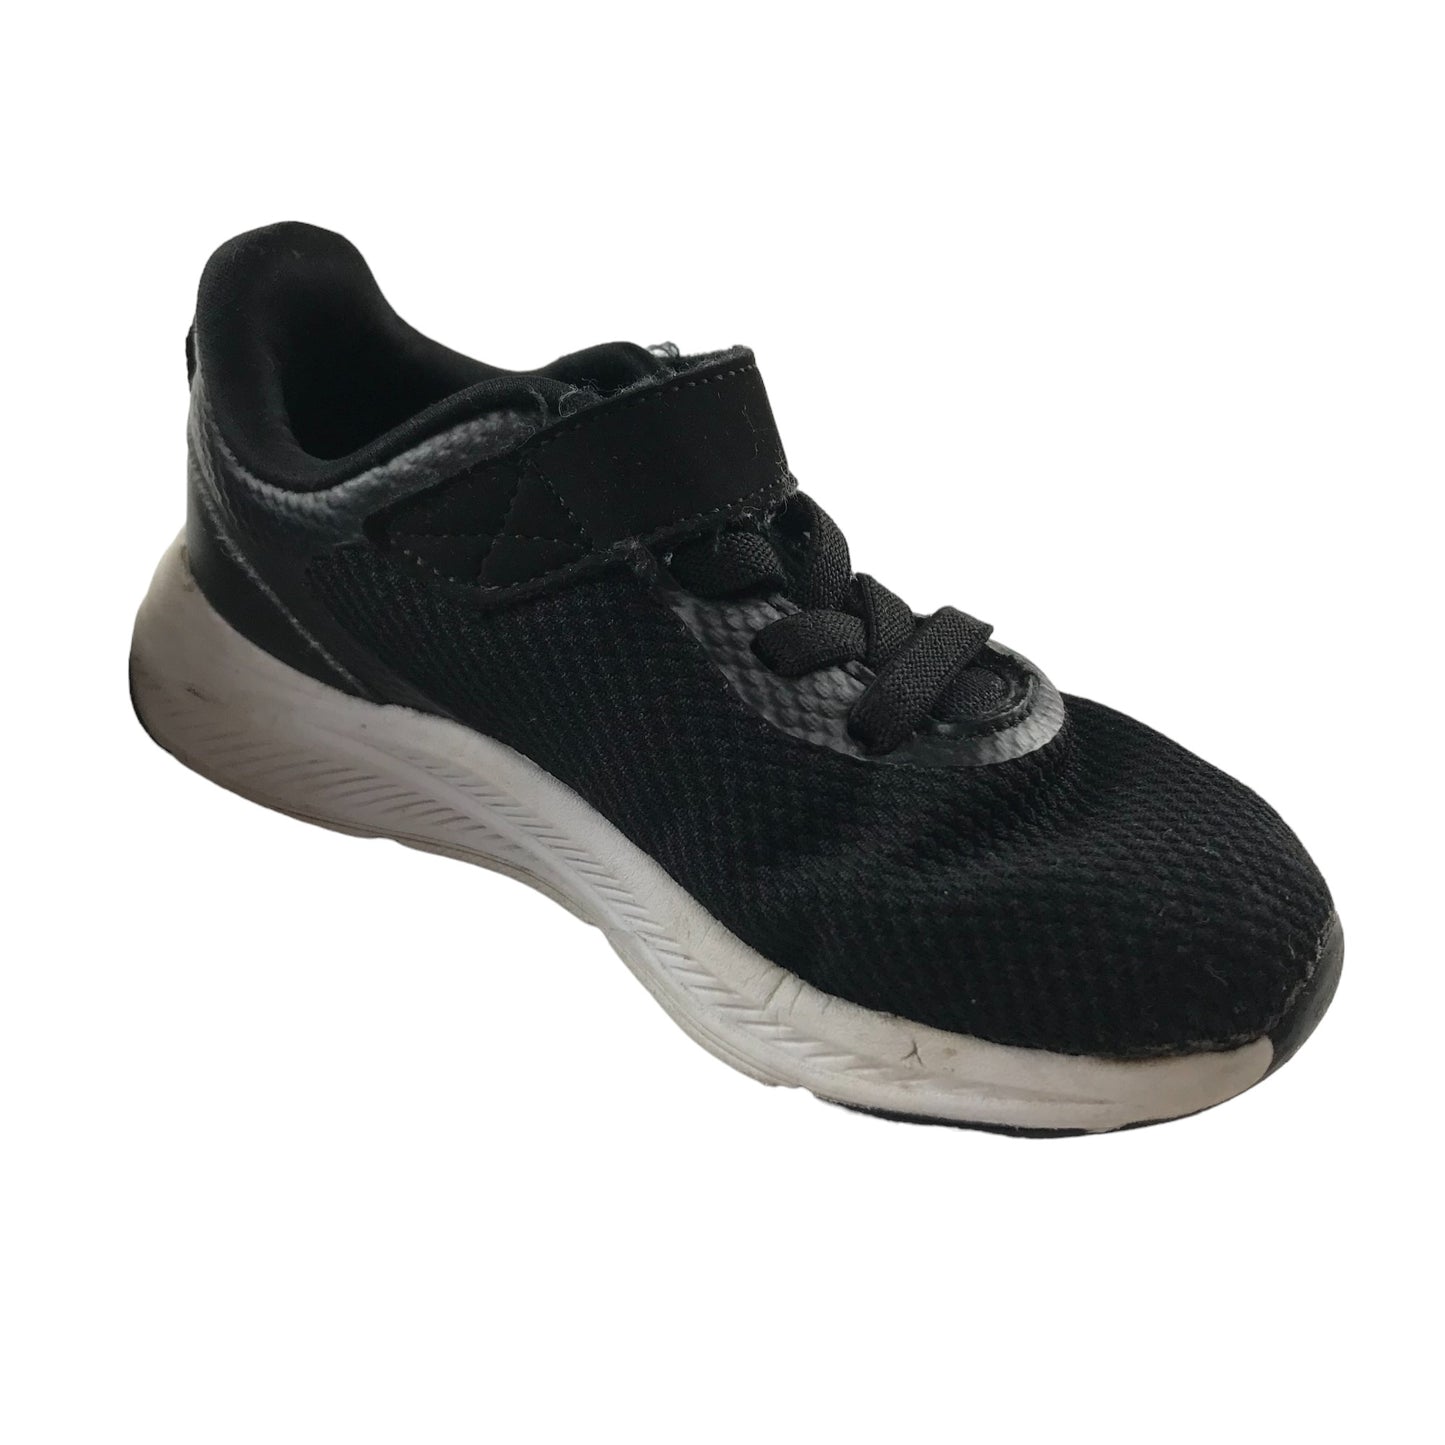 Slazenger Trainers Shoe Size 11C Junior Black with Laces and Loop and Hoop Straps